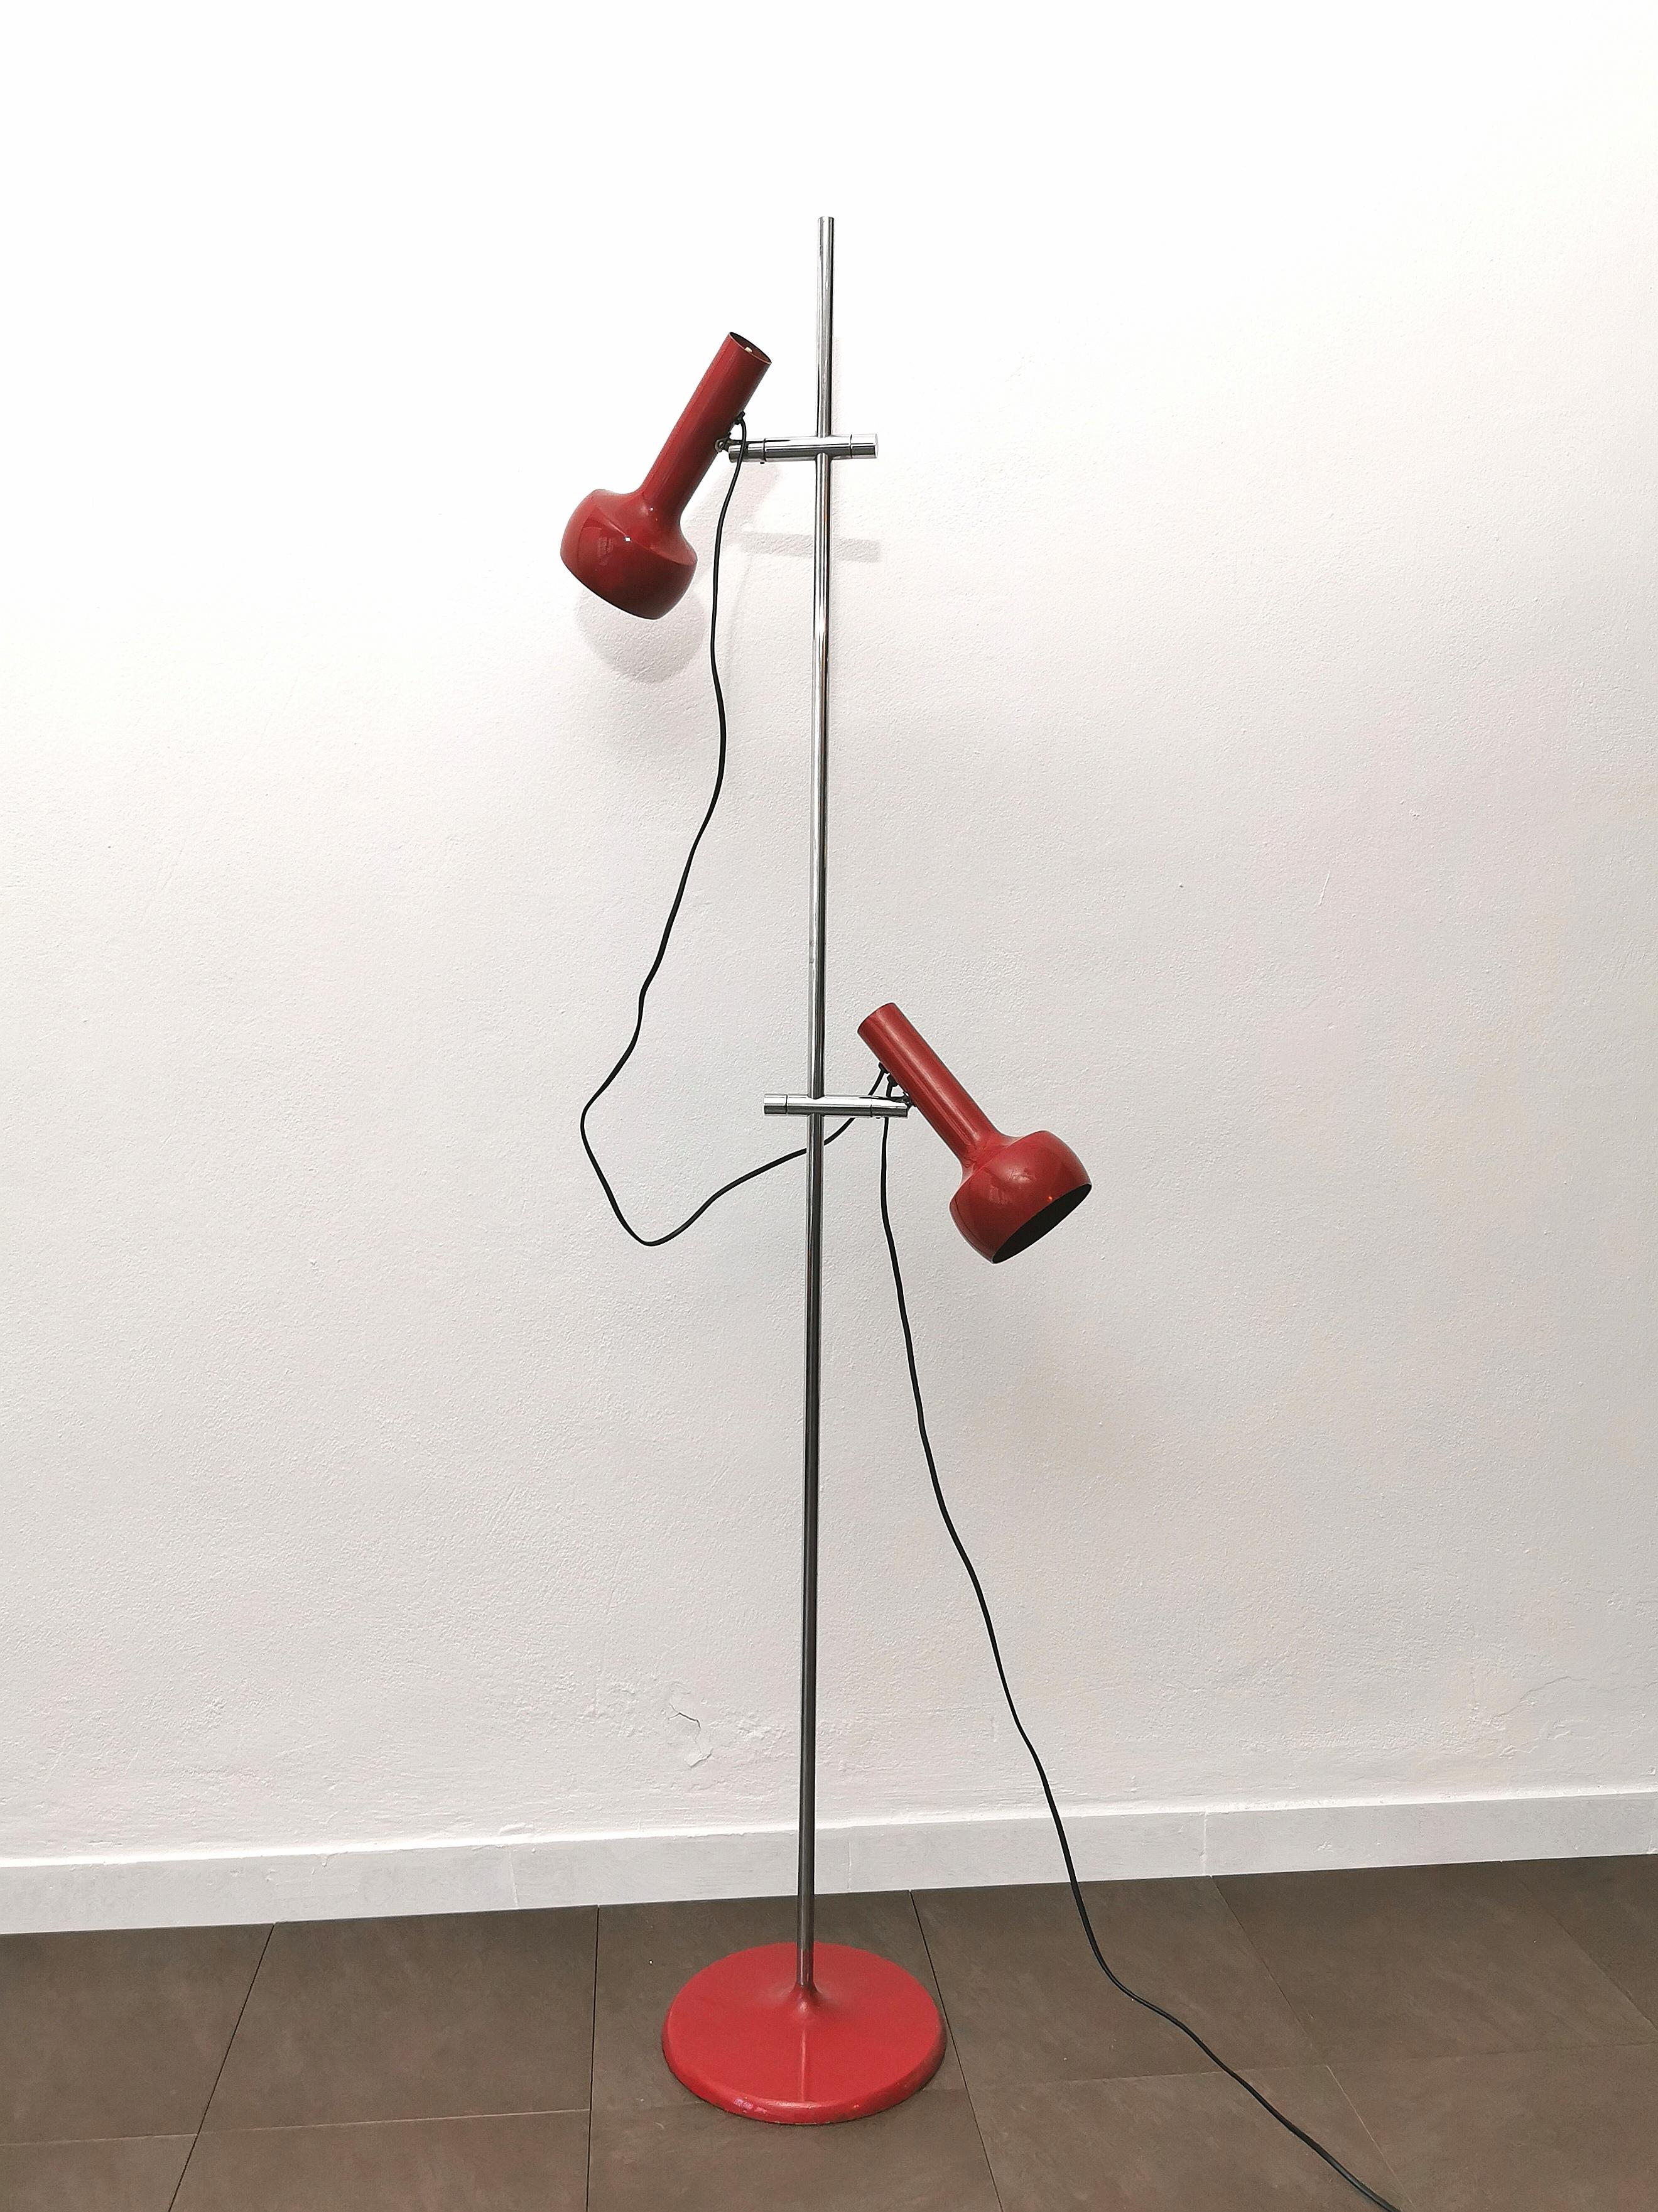 Floor lamp produced in the 70s with joints created by the German company OMI. The lamp has a circular base in red enamelled metal and a stem in chromed metal with two moving joints in chromed brass, which thanks to their joint make the two diffusers